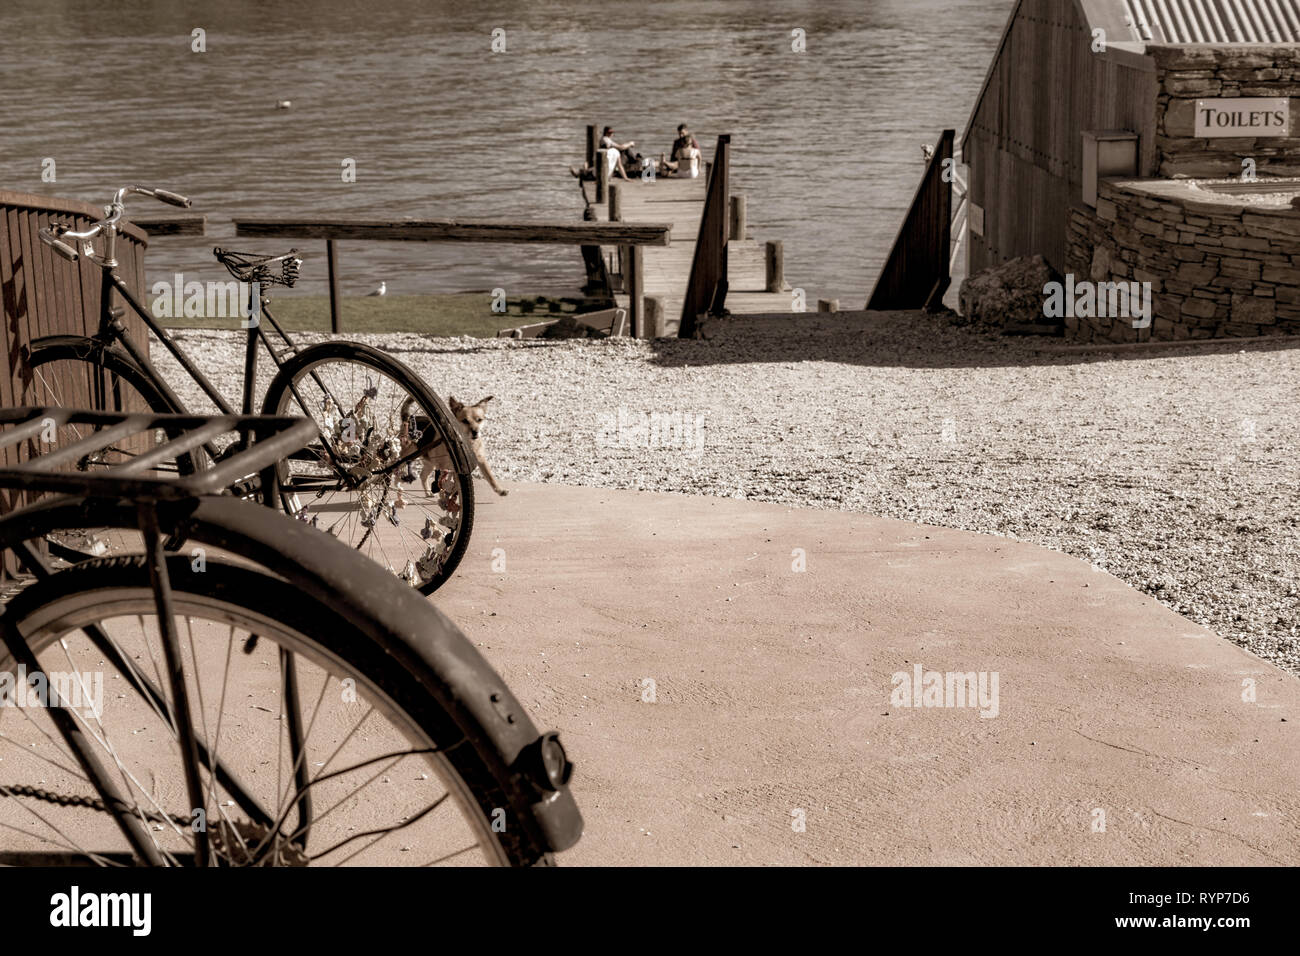 CROMWELL, NEW ZEALAND - OCTOBER 21 2019; Old bicyle wheels in street in small town with group four youth in distance on jetty on Lake Dunstan aged ima Stock Photo